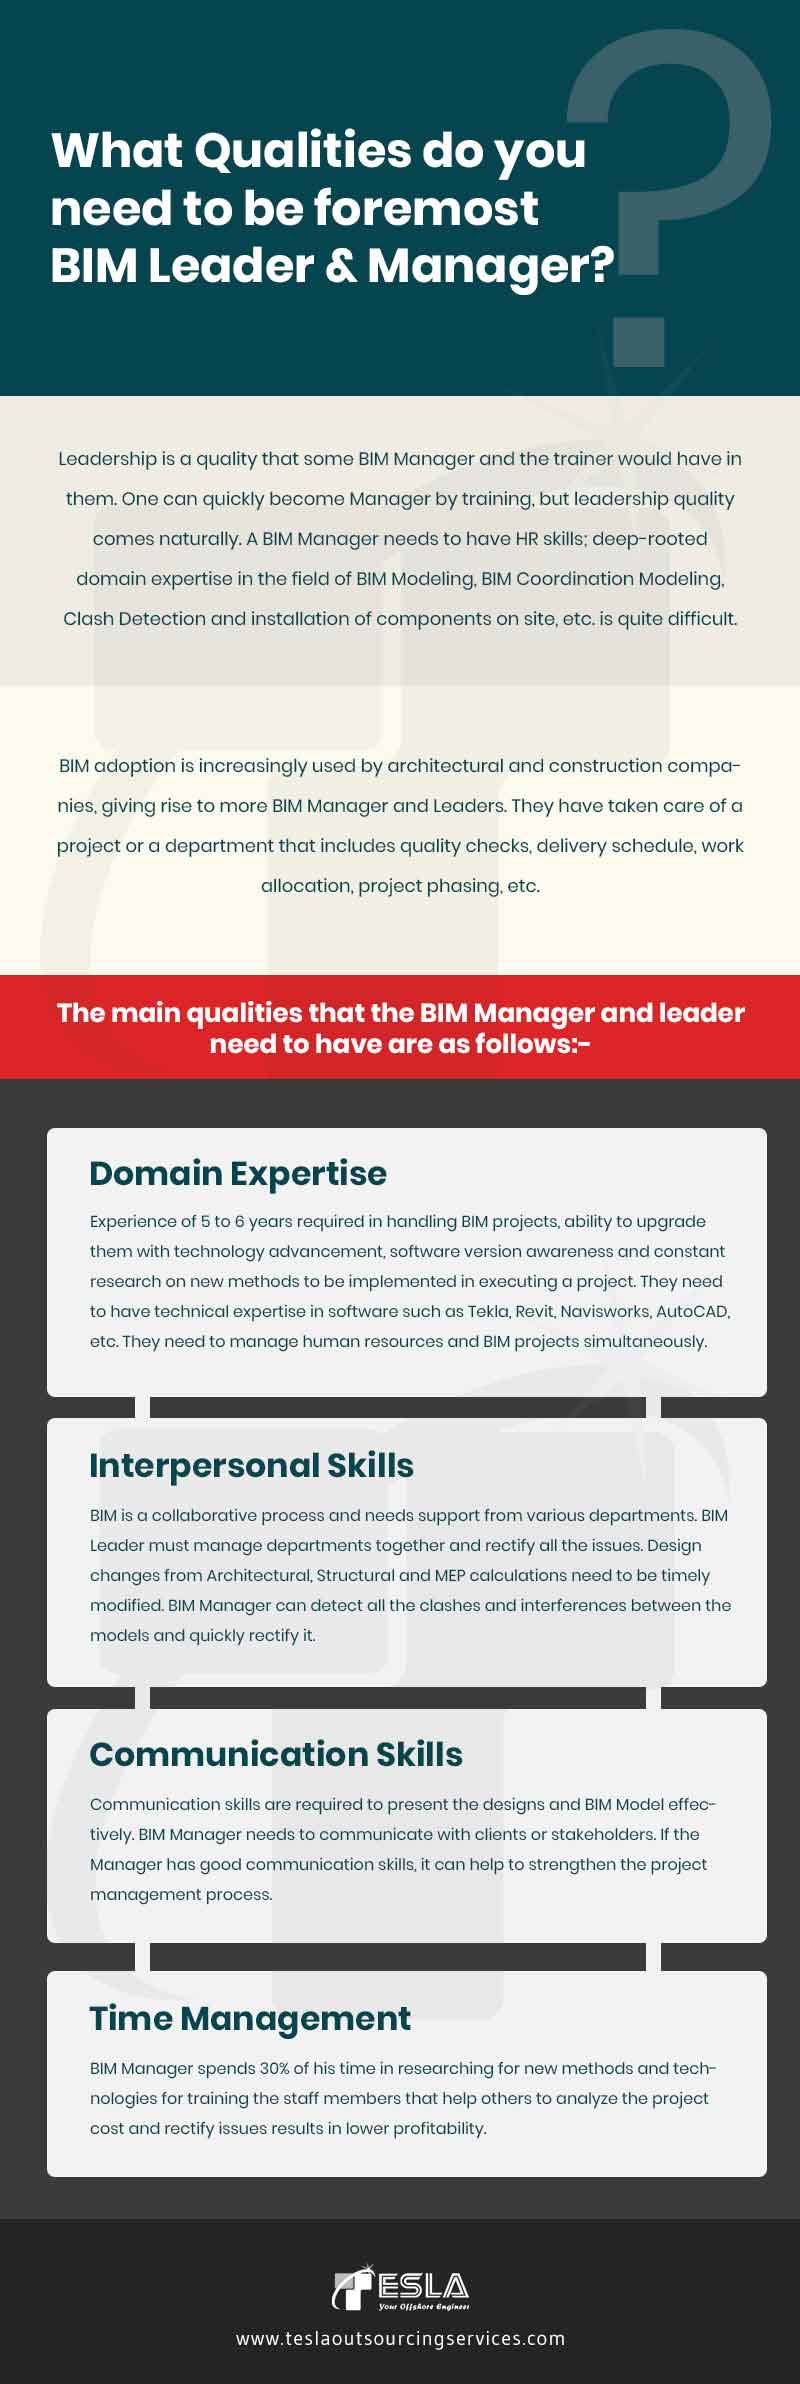 What Qualities do you need to be foremost BIM Leader & Manager?
